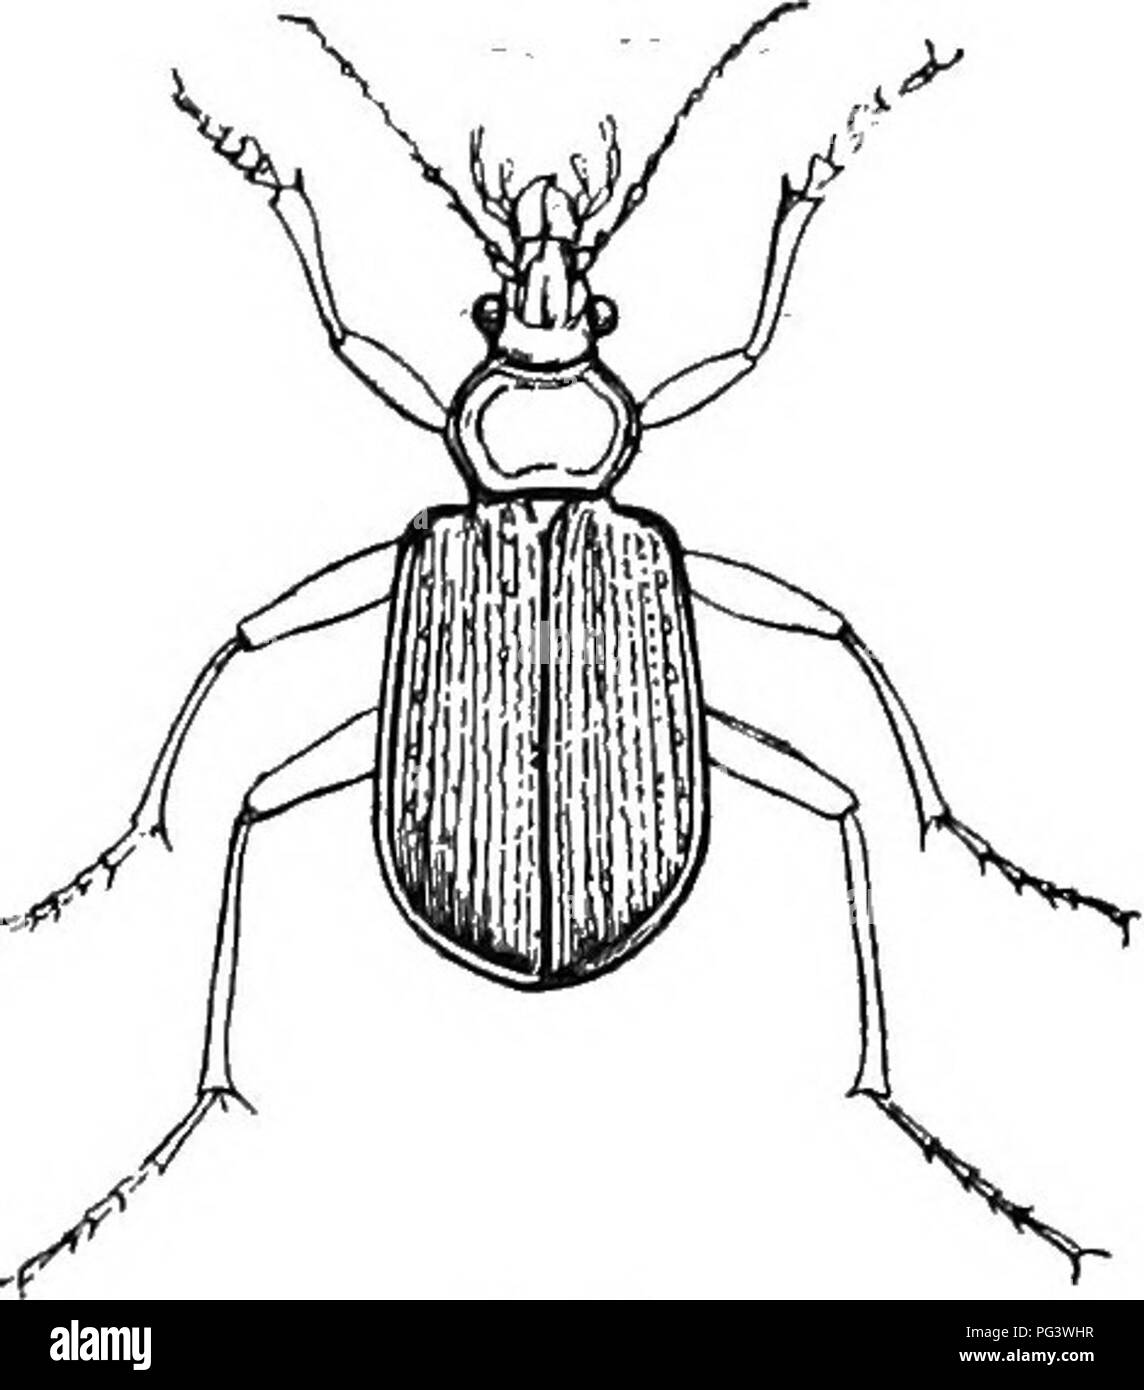 . An illustrated descriptive catalogue of the coleoptera or beetles (exclusive of the Rhynchophora) known to occur in Indiana : with bibliography and descriptions of new species . Beetles. THE GKOCND BEETLES. 47. 31 (127). Calosoma sceutatob Fab., Sys. Bnt, I, 1785, 239. Oval, robust. Disk of thorax blue or purplish-black, the margins golden or red- dish-bronzed ; legs blue; abdomen green and red. Thorax very short, more than twice as wide as long, nearly smooth, sides and hind angles rounded. Elytra striate, punctured. Middle tibire of male curved and with a dense brush of hairs on the inner  Stock Photo